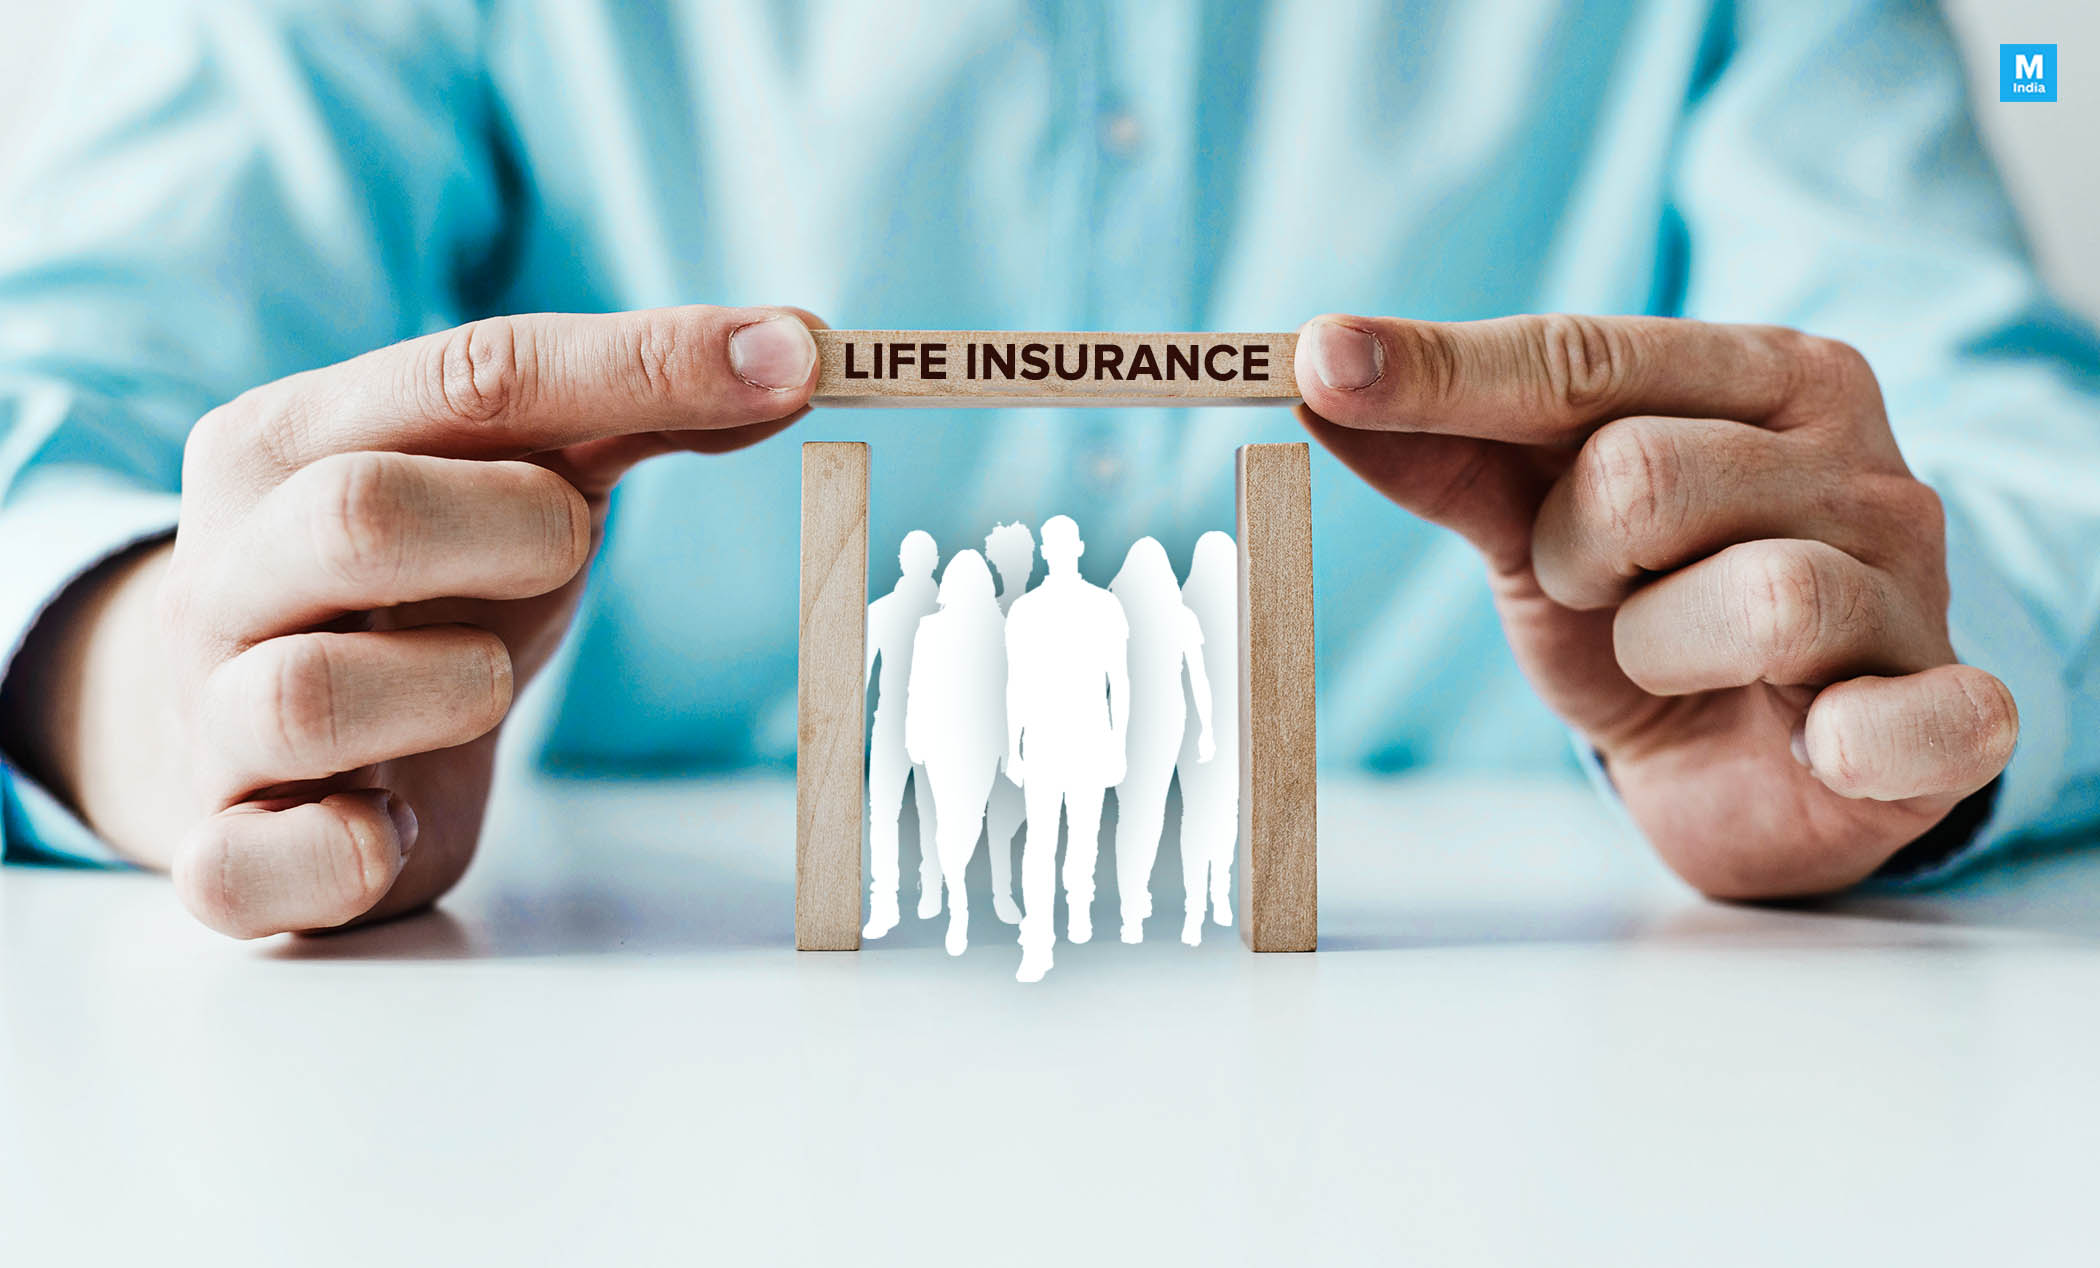 How Important Is Life Insurance? Let's Read the Review!